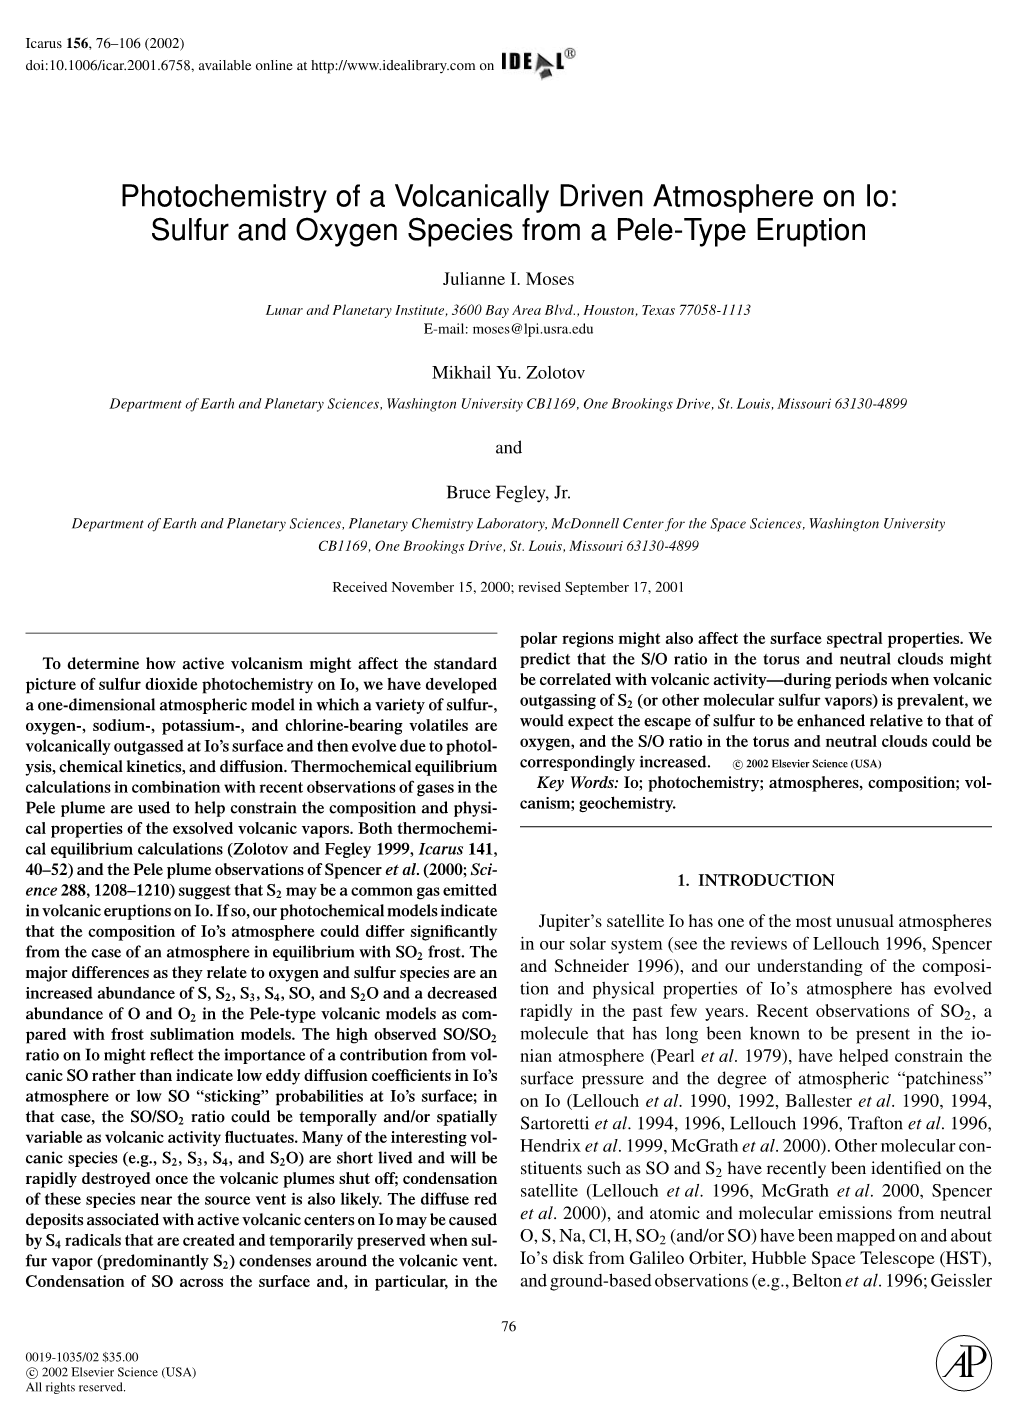 Sulfur and Oxygen Species from a Pele-Type Eruption